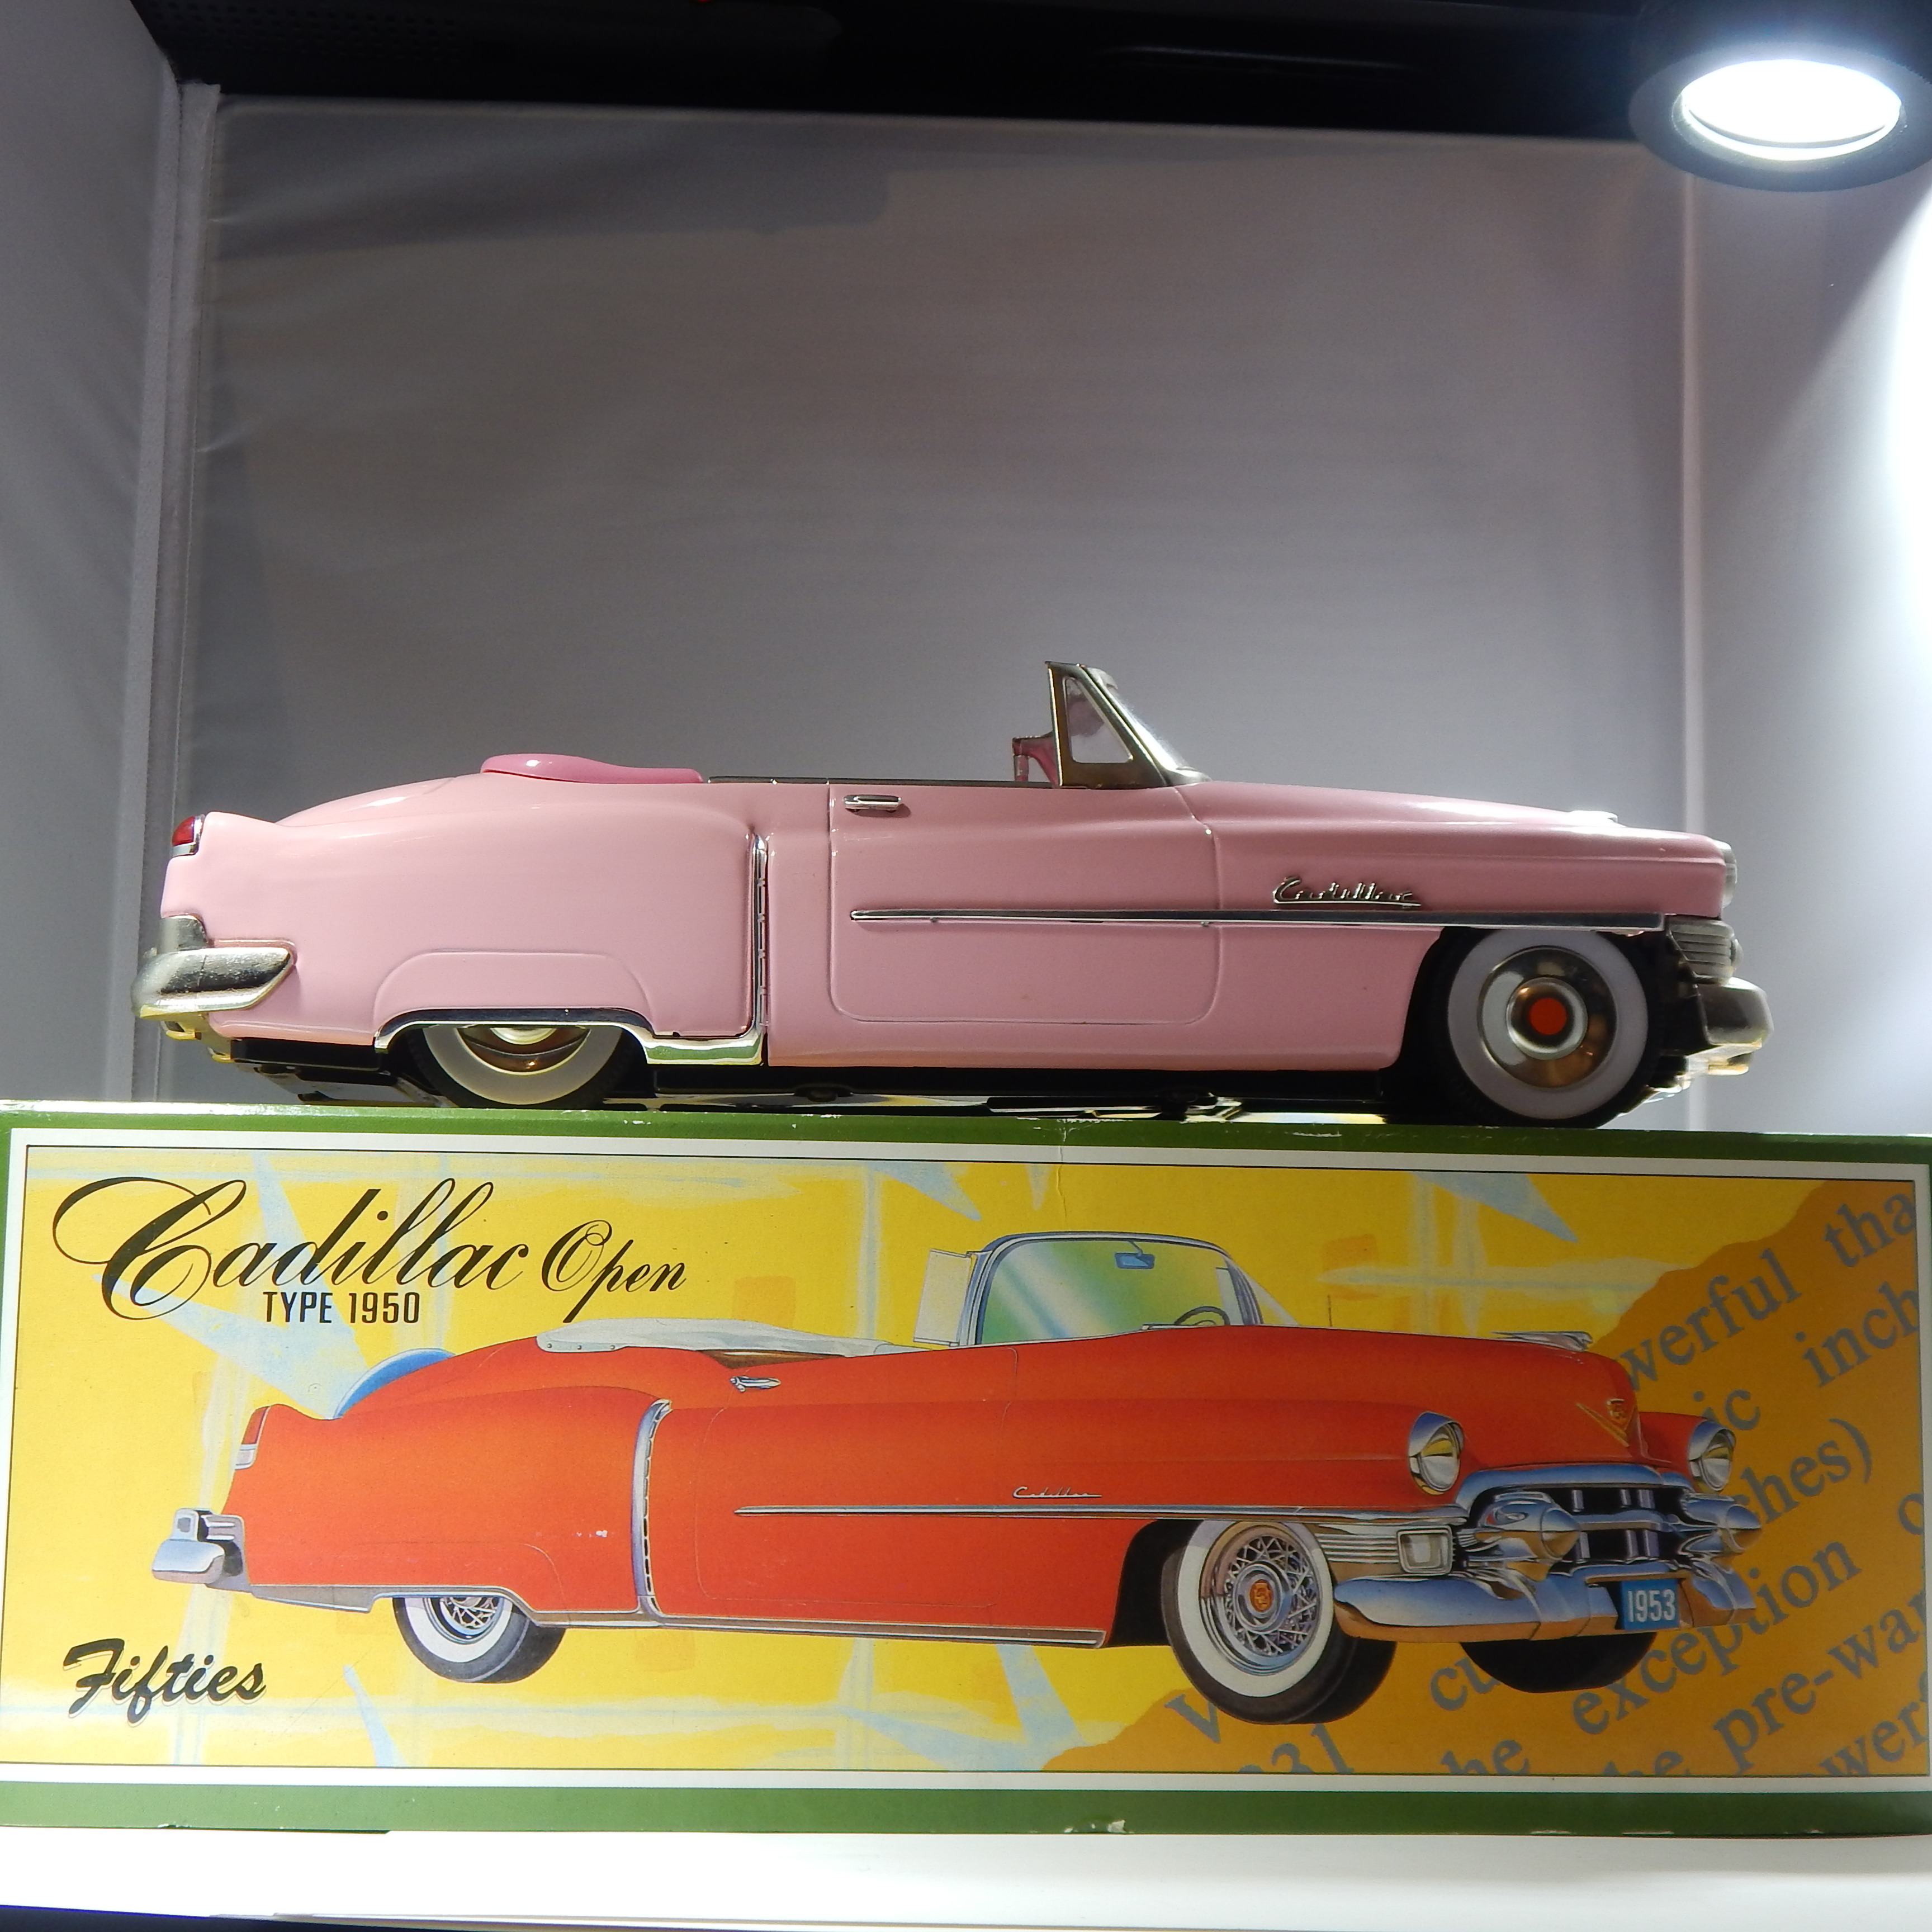 Cadillac Open Type 1950 Collectible